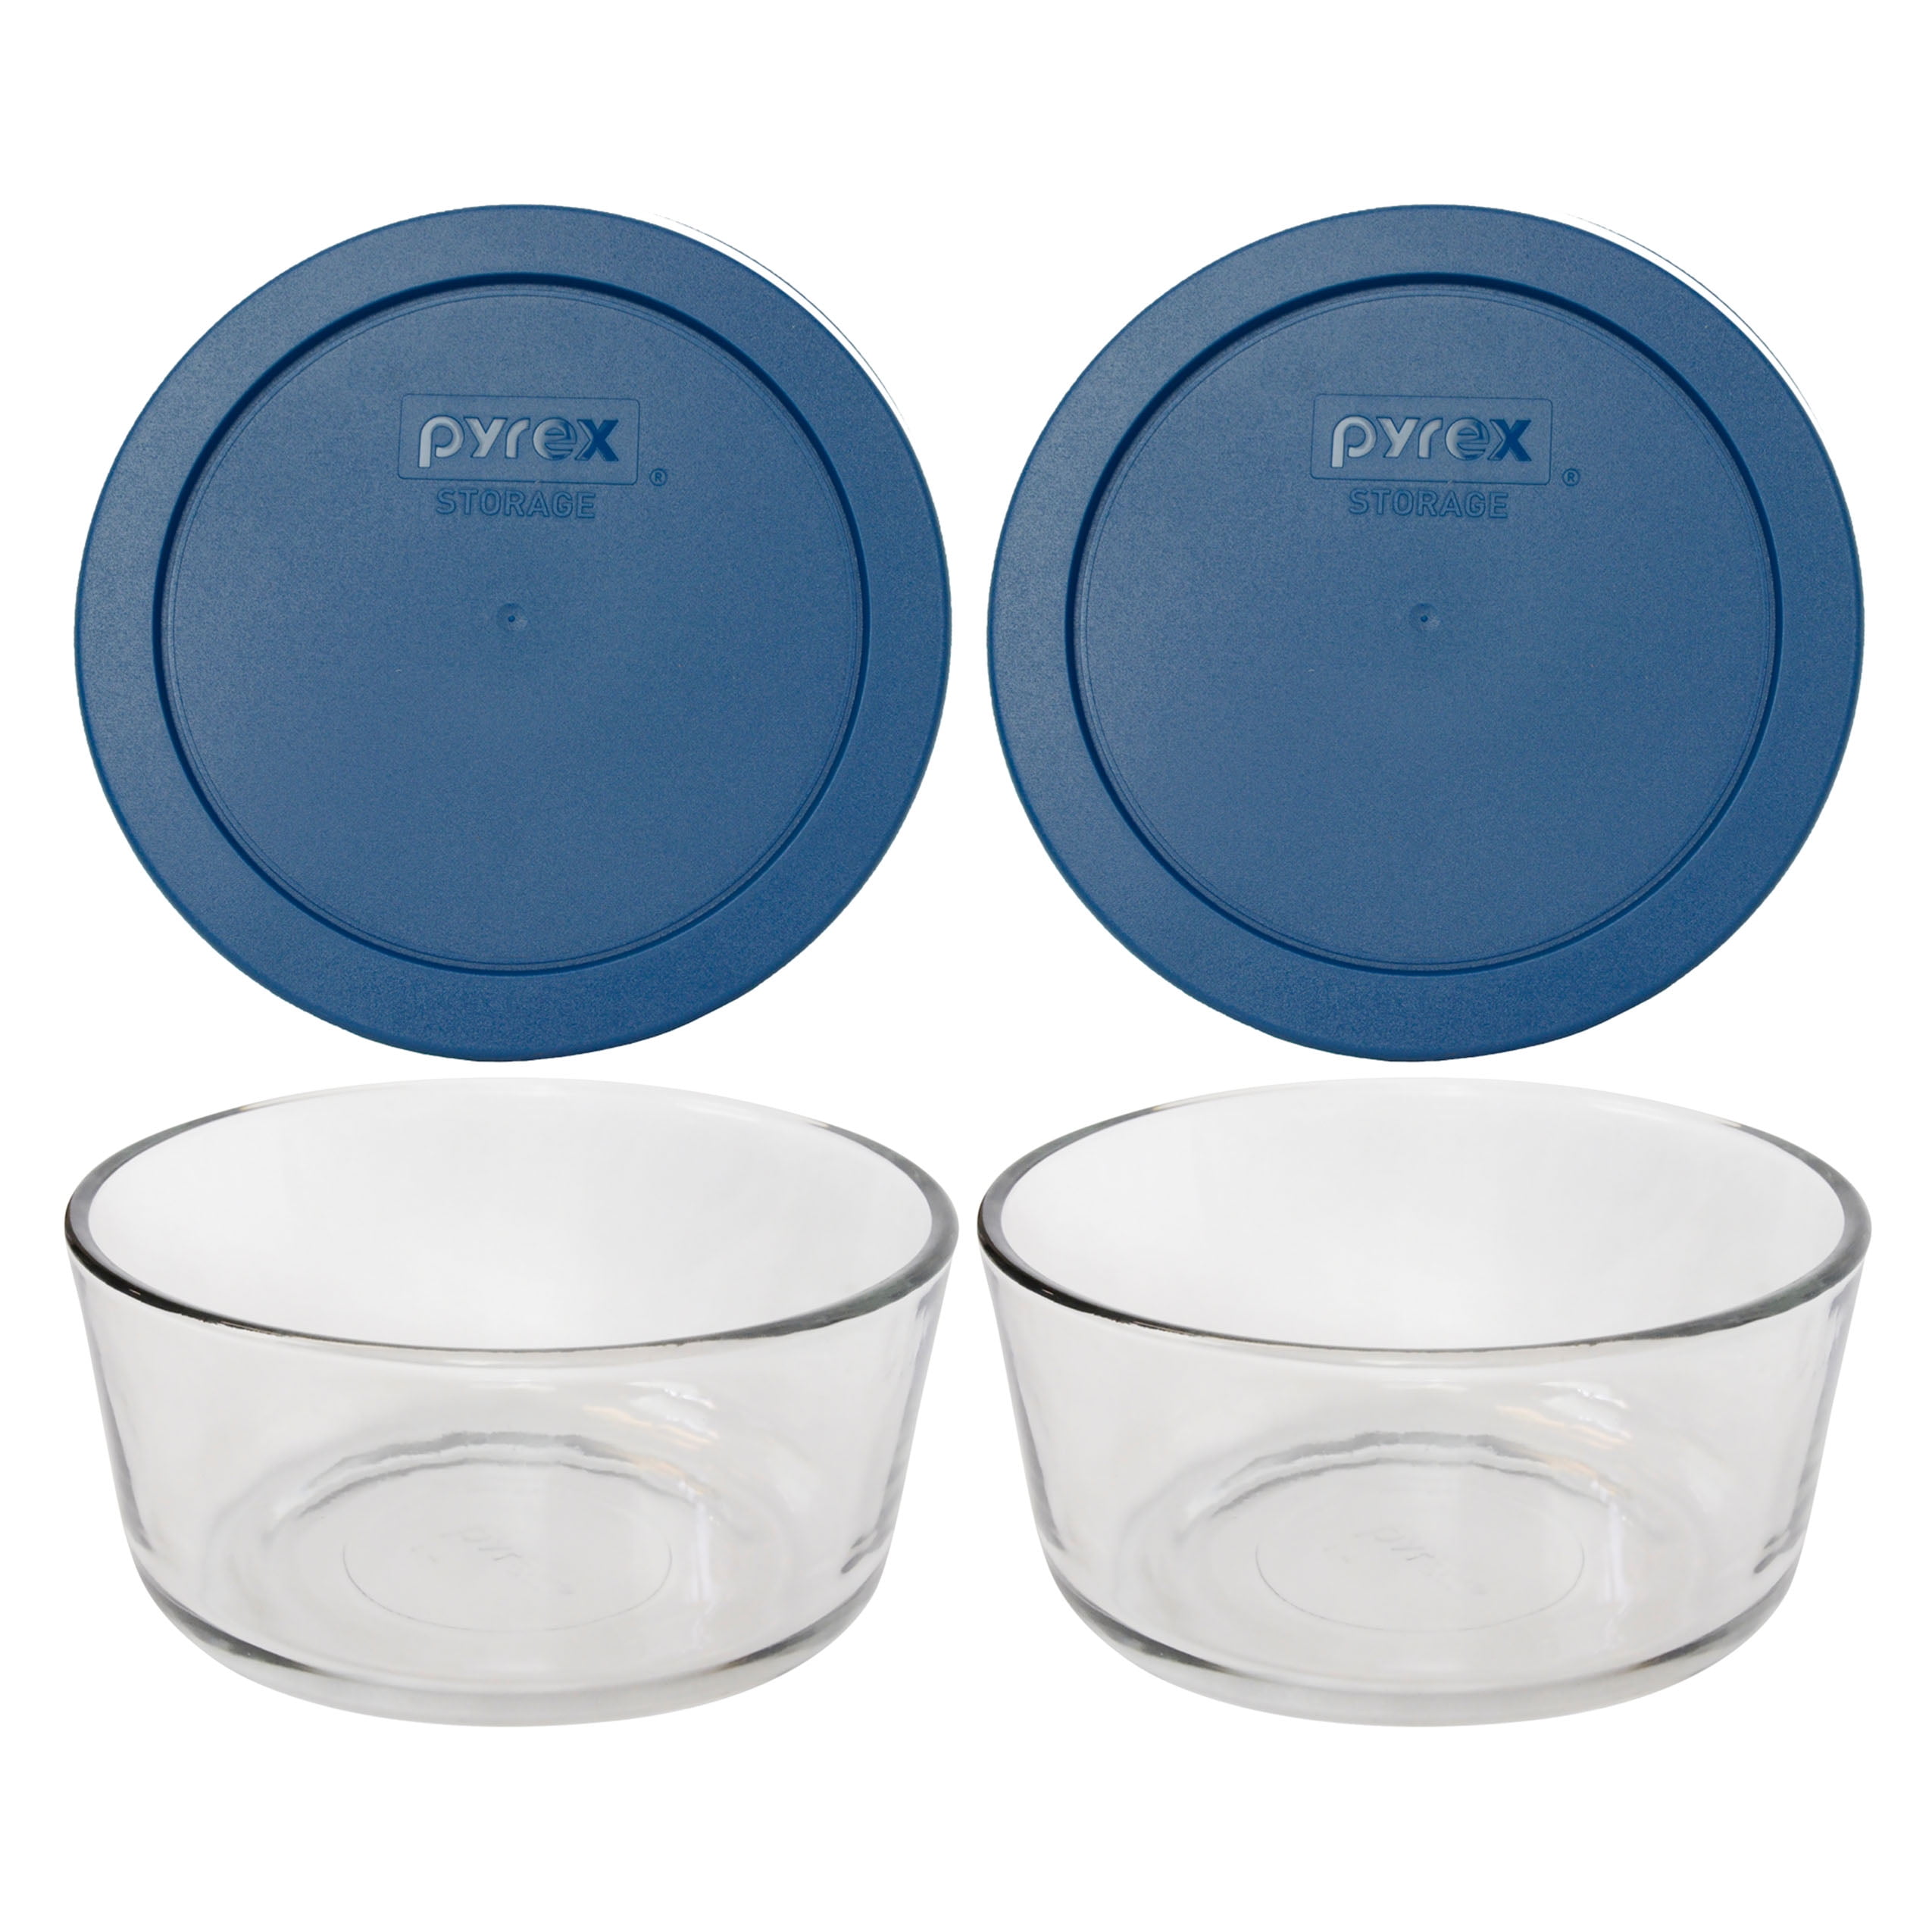 Pyrex 7201-PC Round 4 Cup Storage Lid Cover Blue 4 Pack New for Glass Bowl 